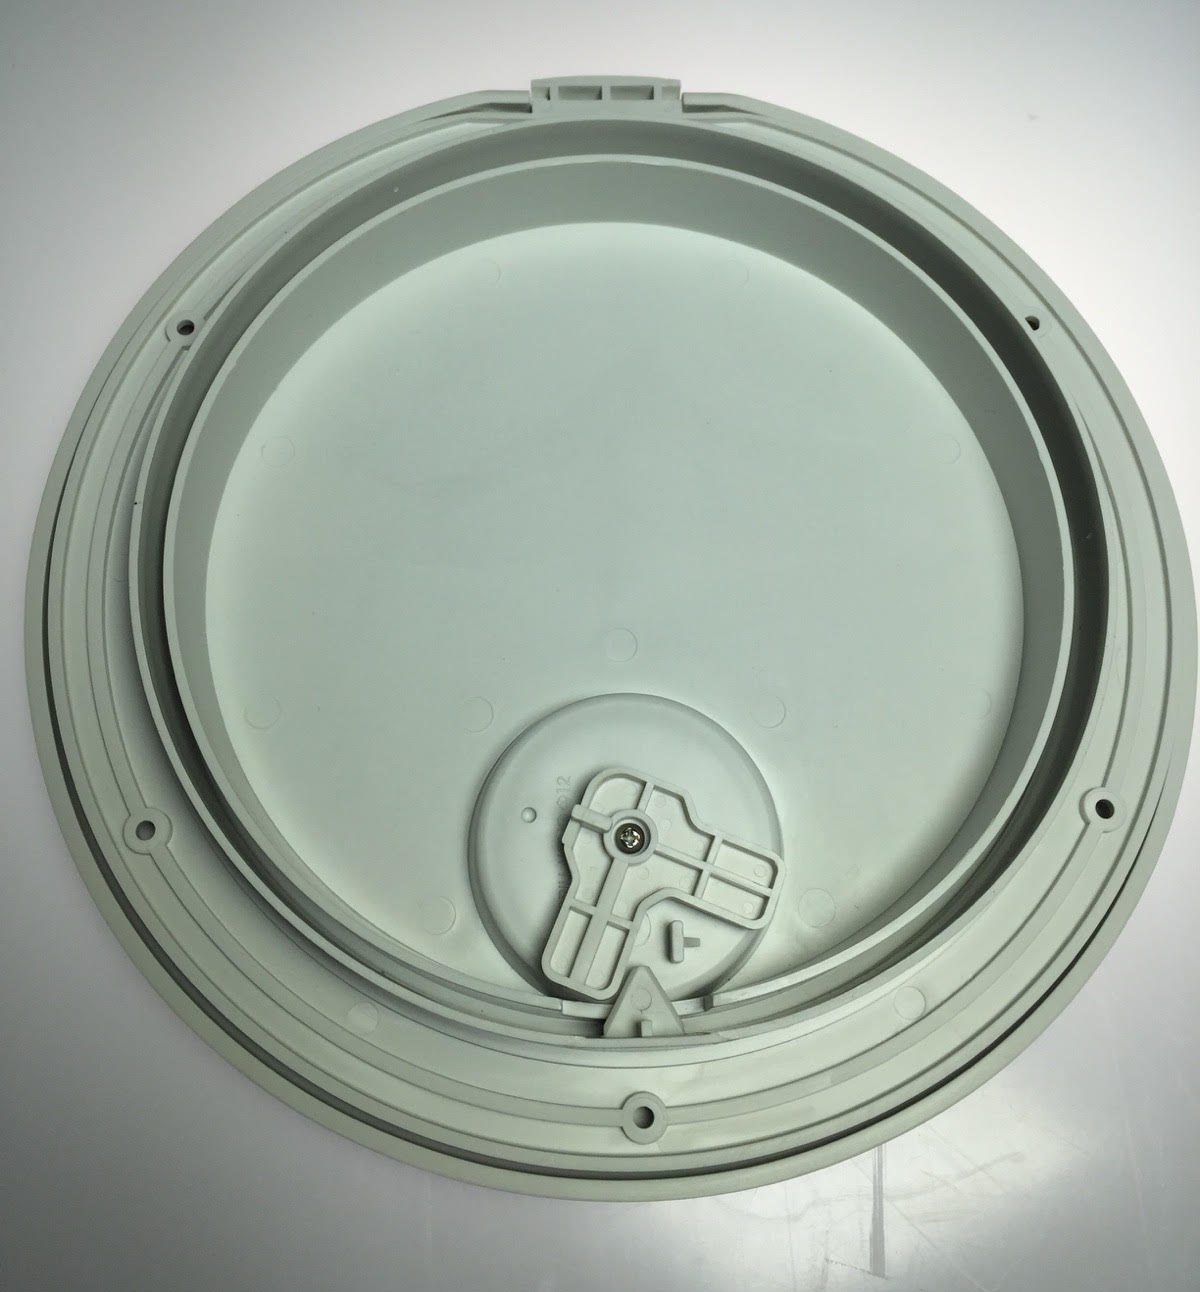 Lalizas Round Hinged Access Hatch Inspection Port Small 280mm Boat Deck